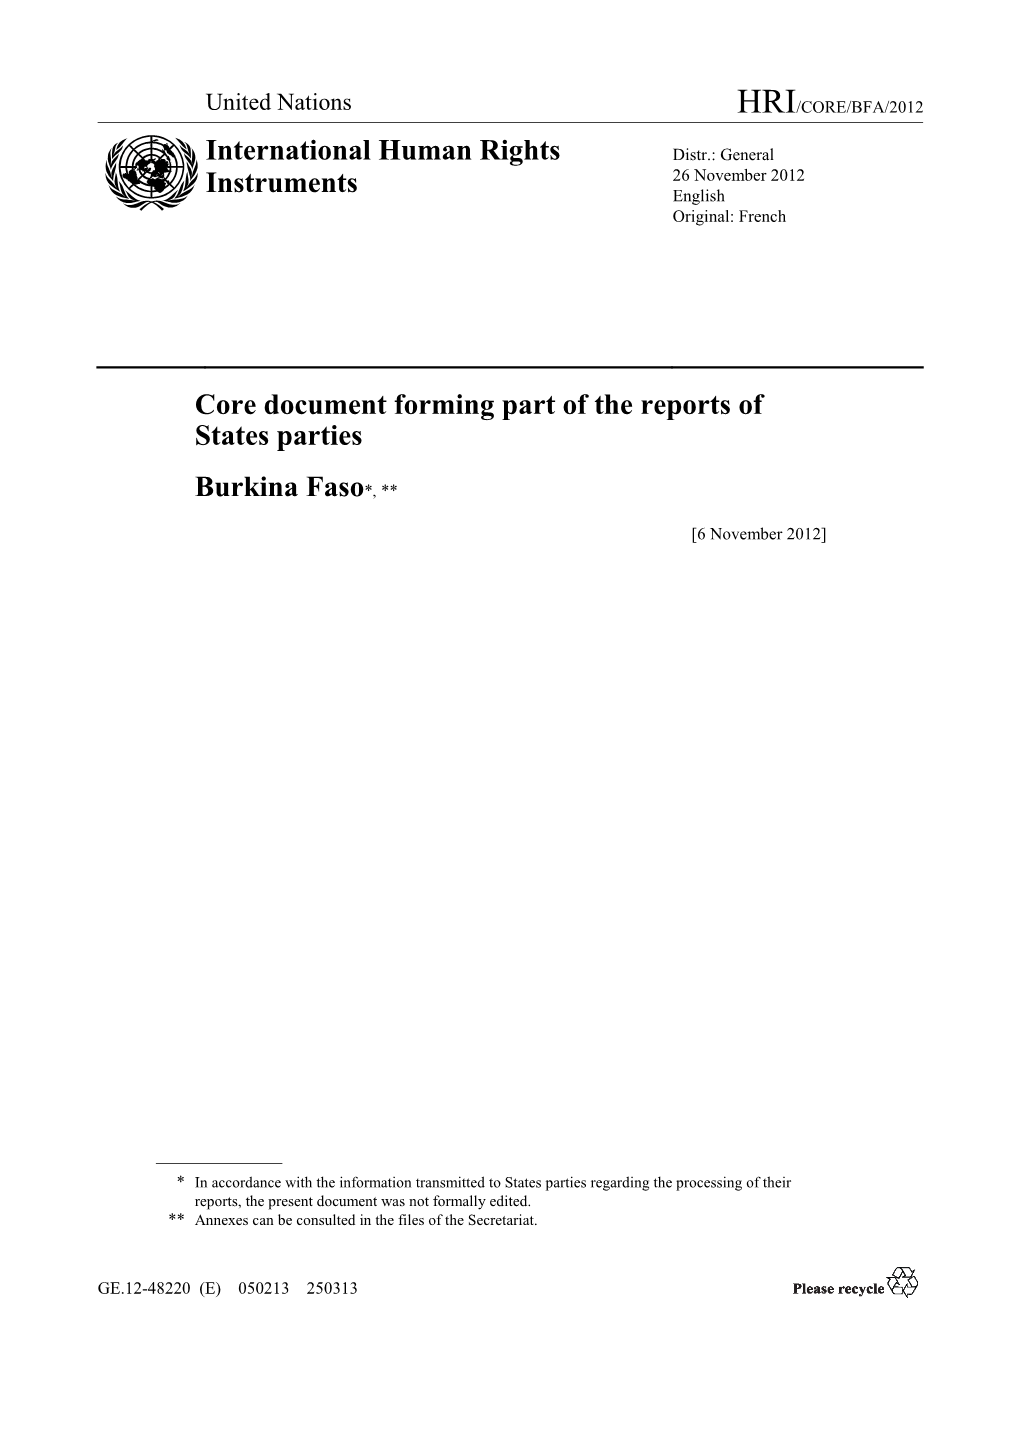 Core Document Forming Part of the Reports of States Parties Burkina